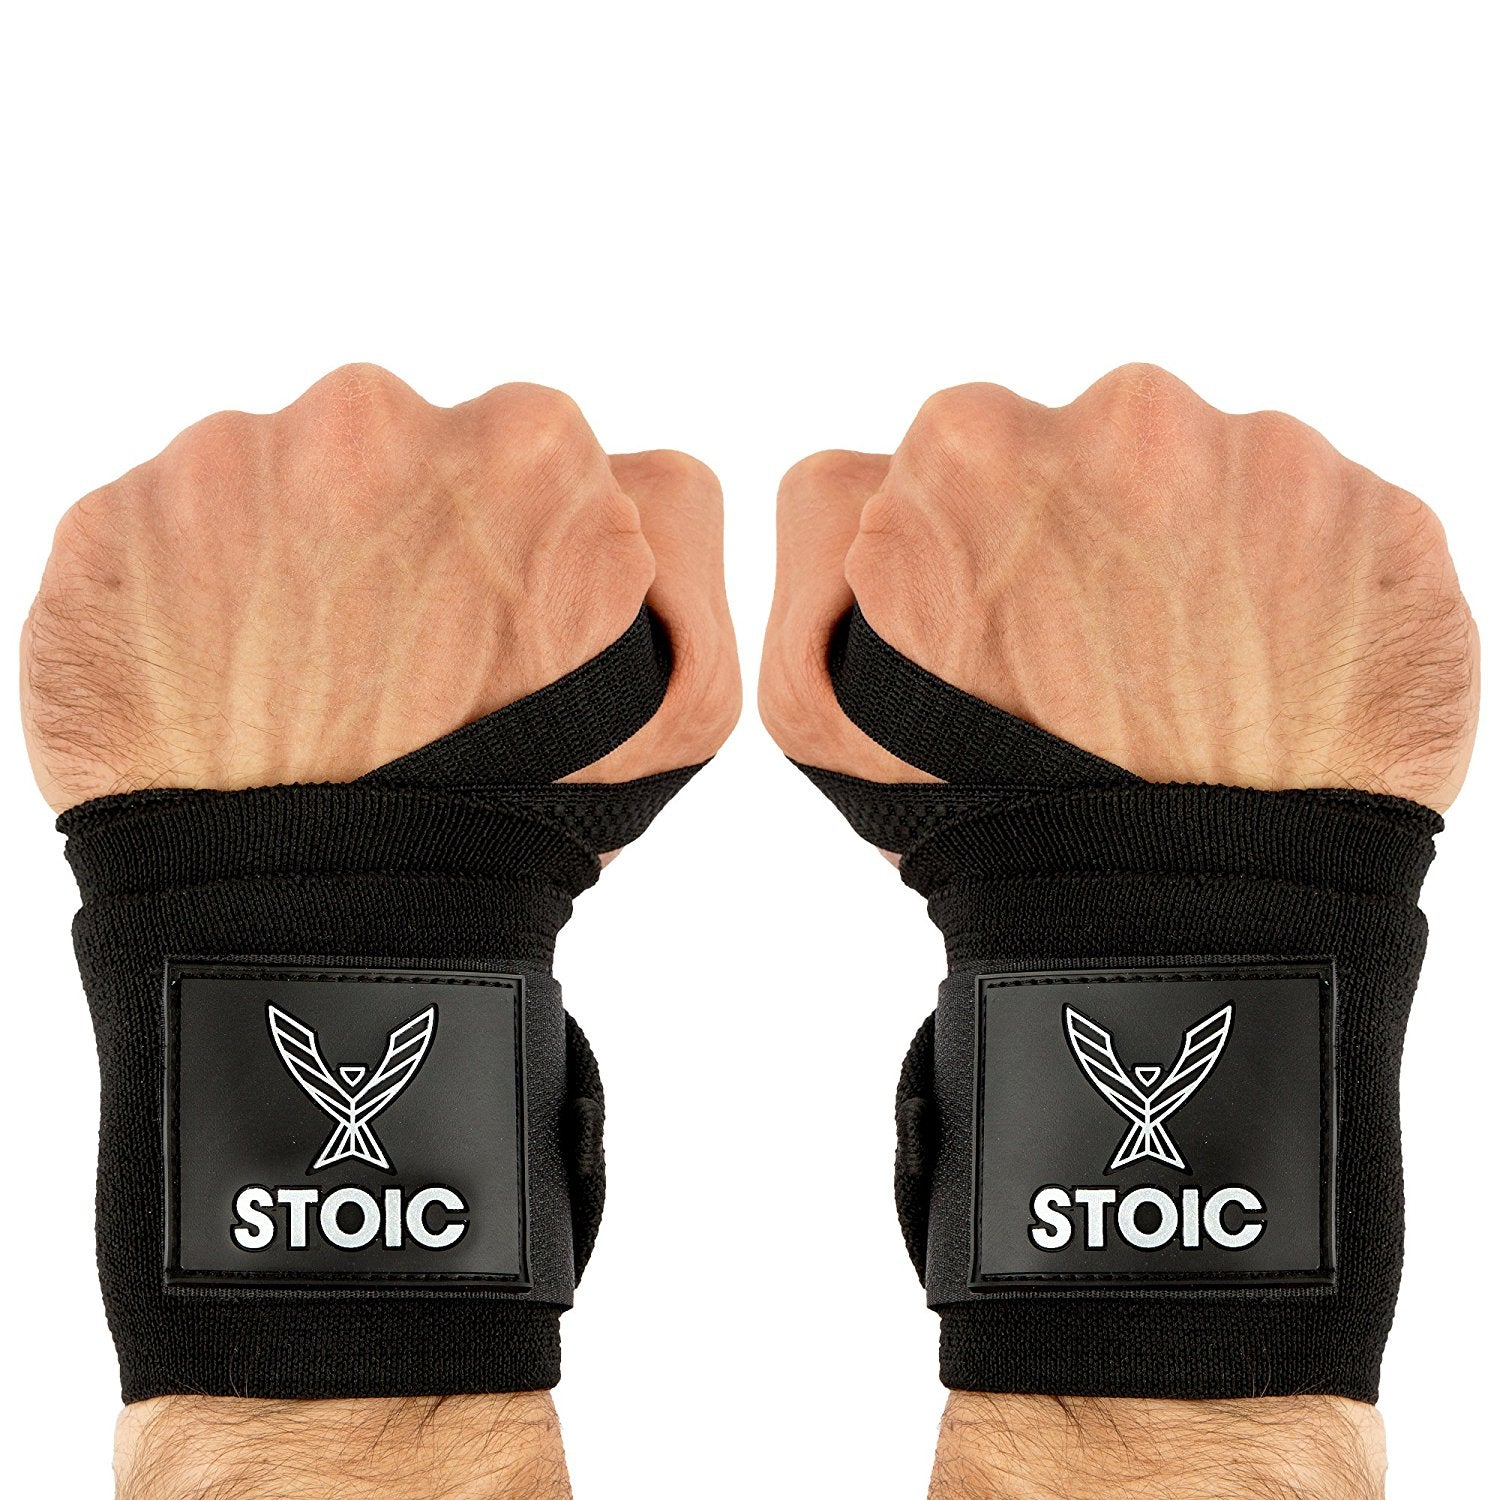 Professional Quality Wrist Wraps Provides Wrist Supports protection for Crossfit - Everyday Crosstrain